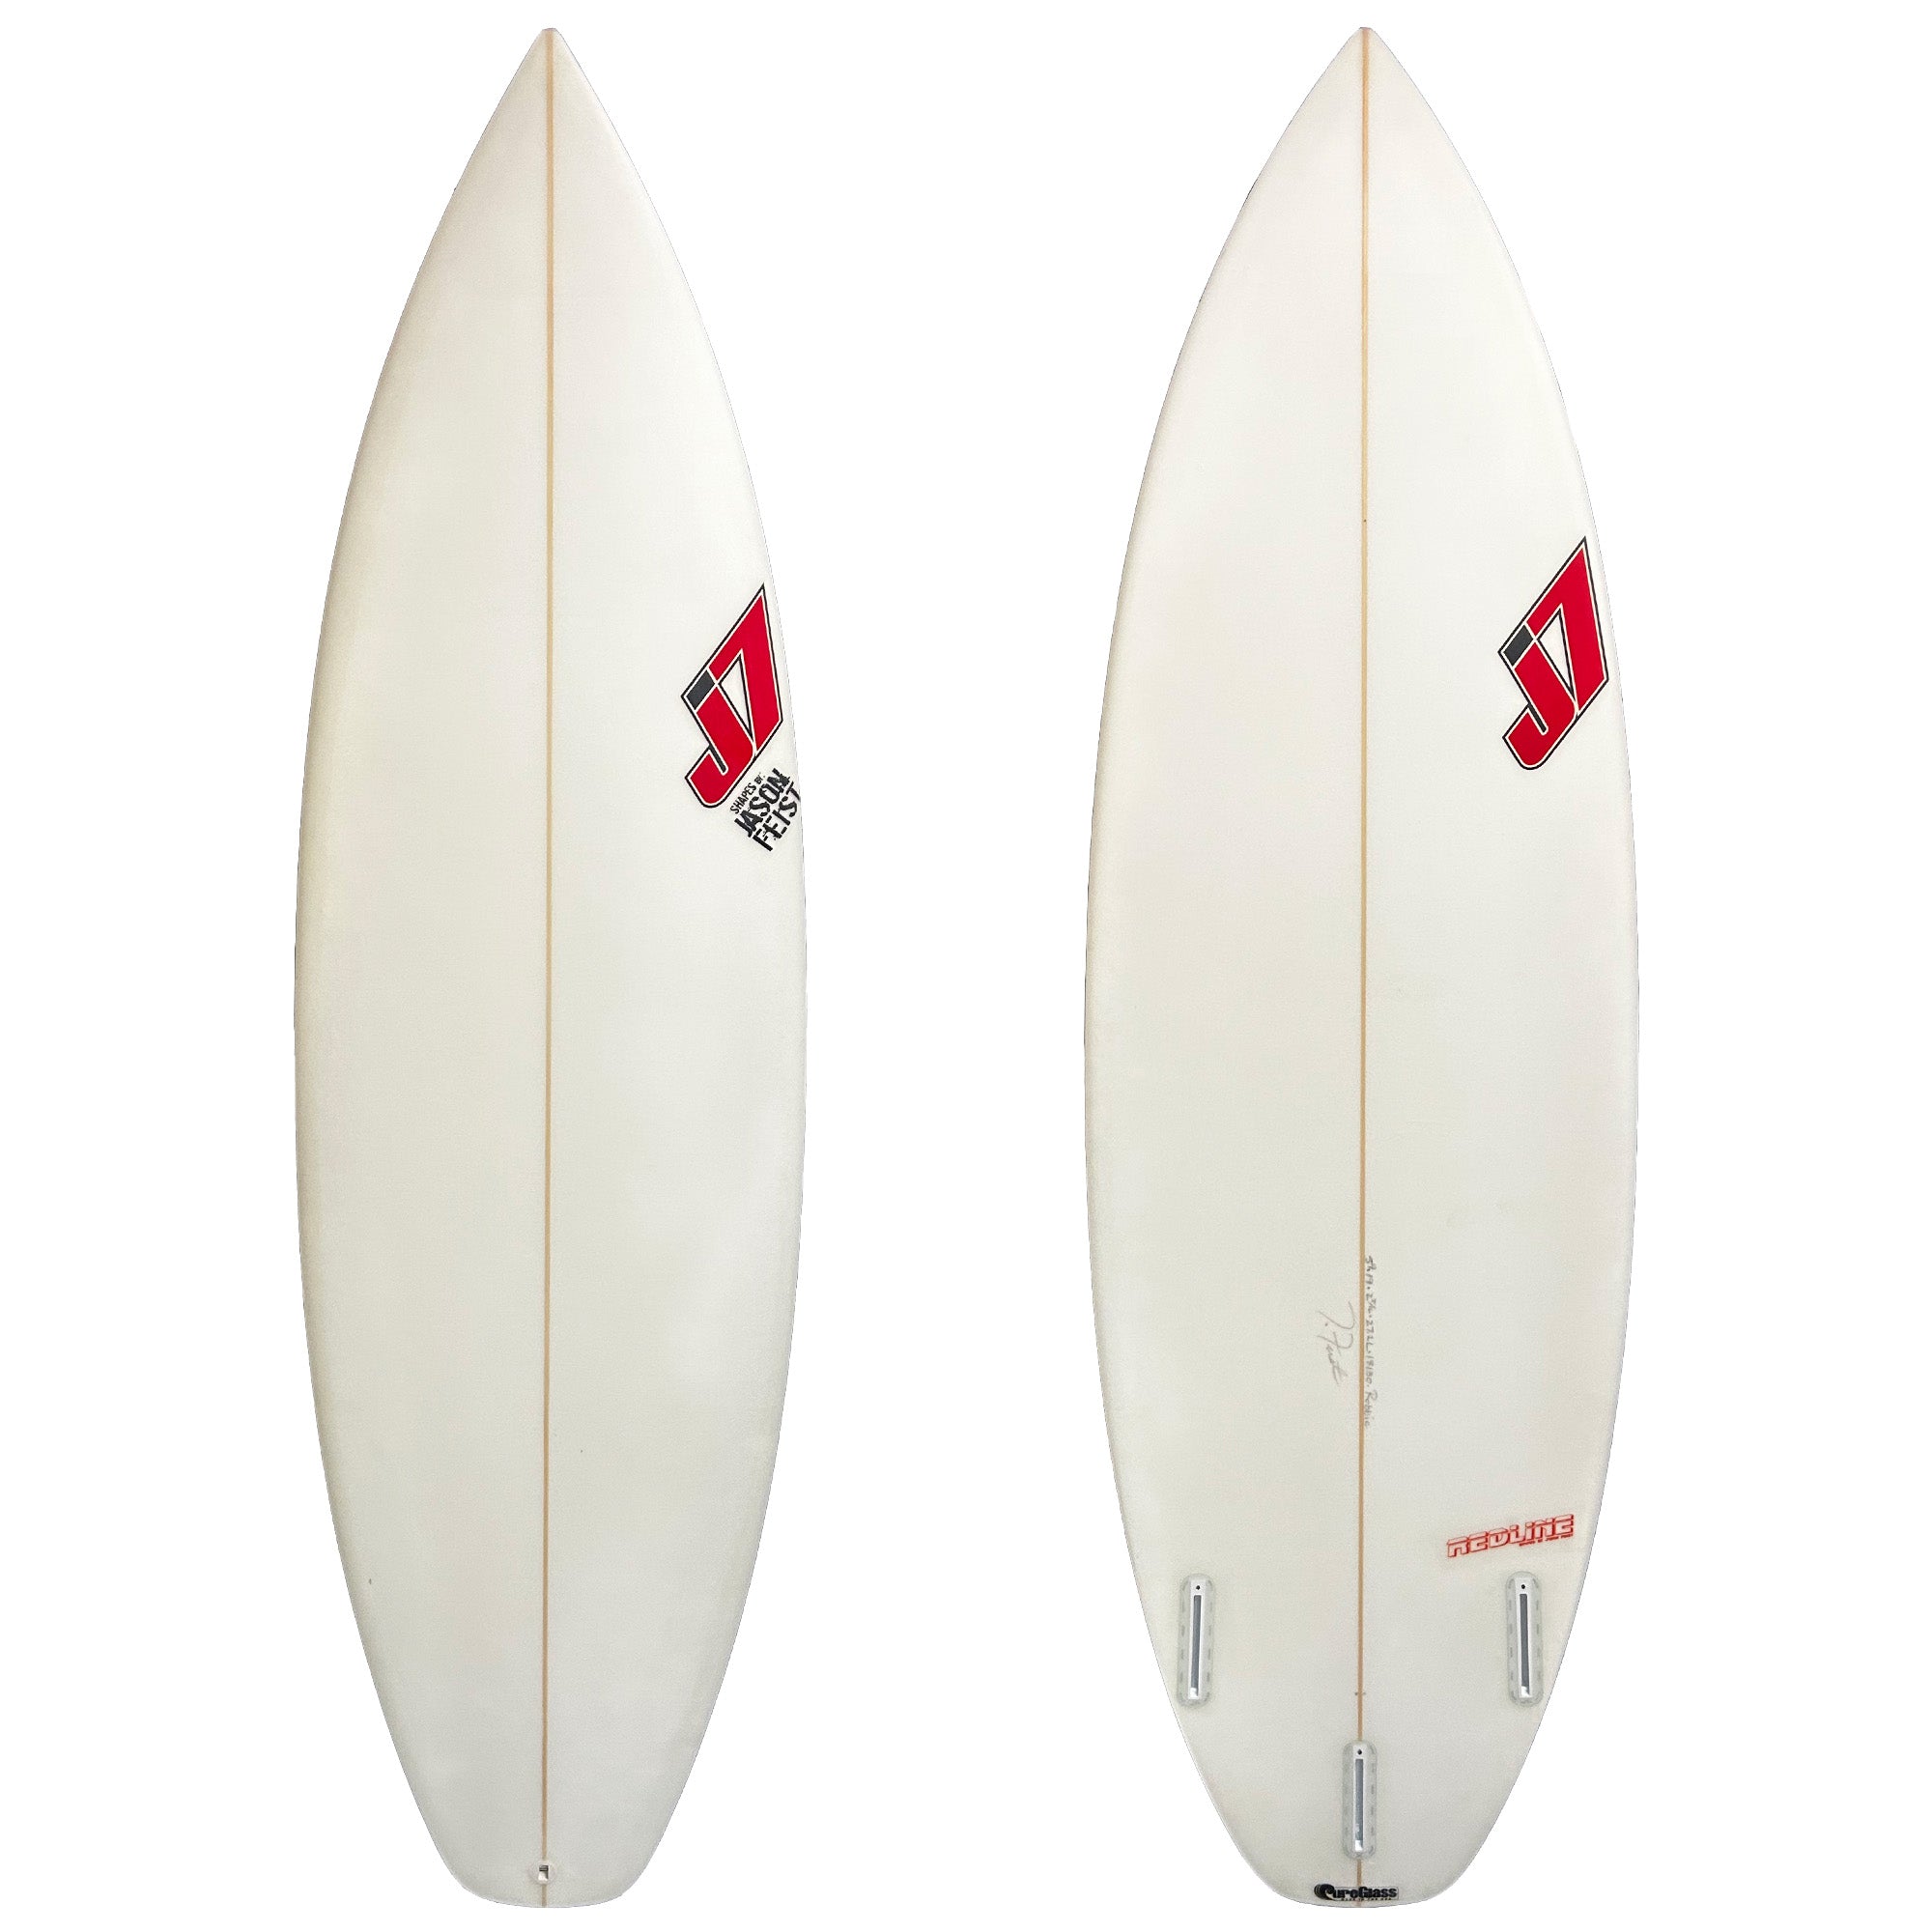 J7 5'9 Consignment Surfboard